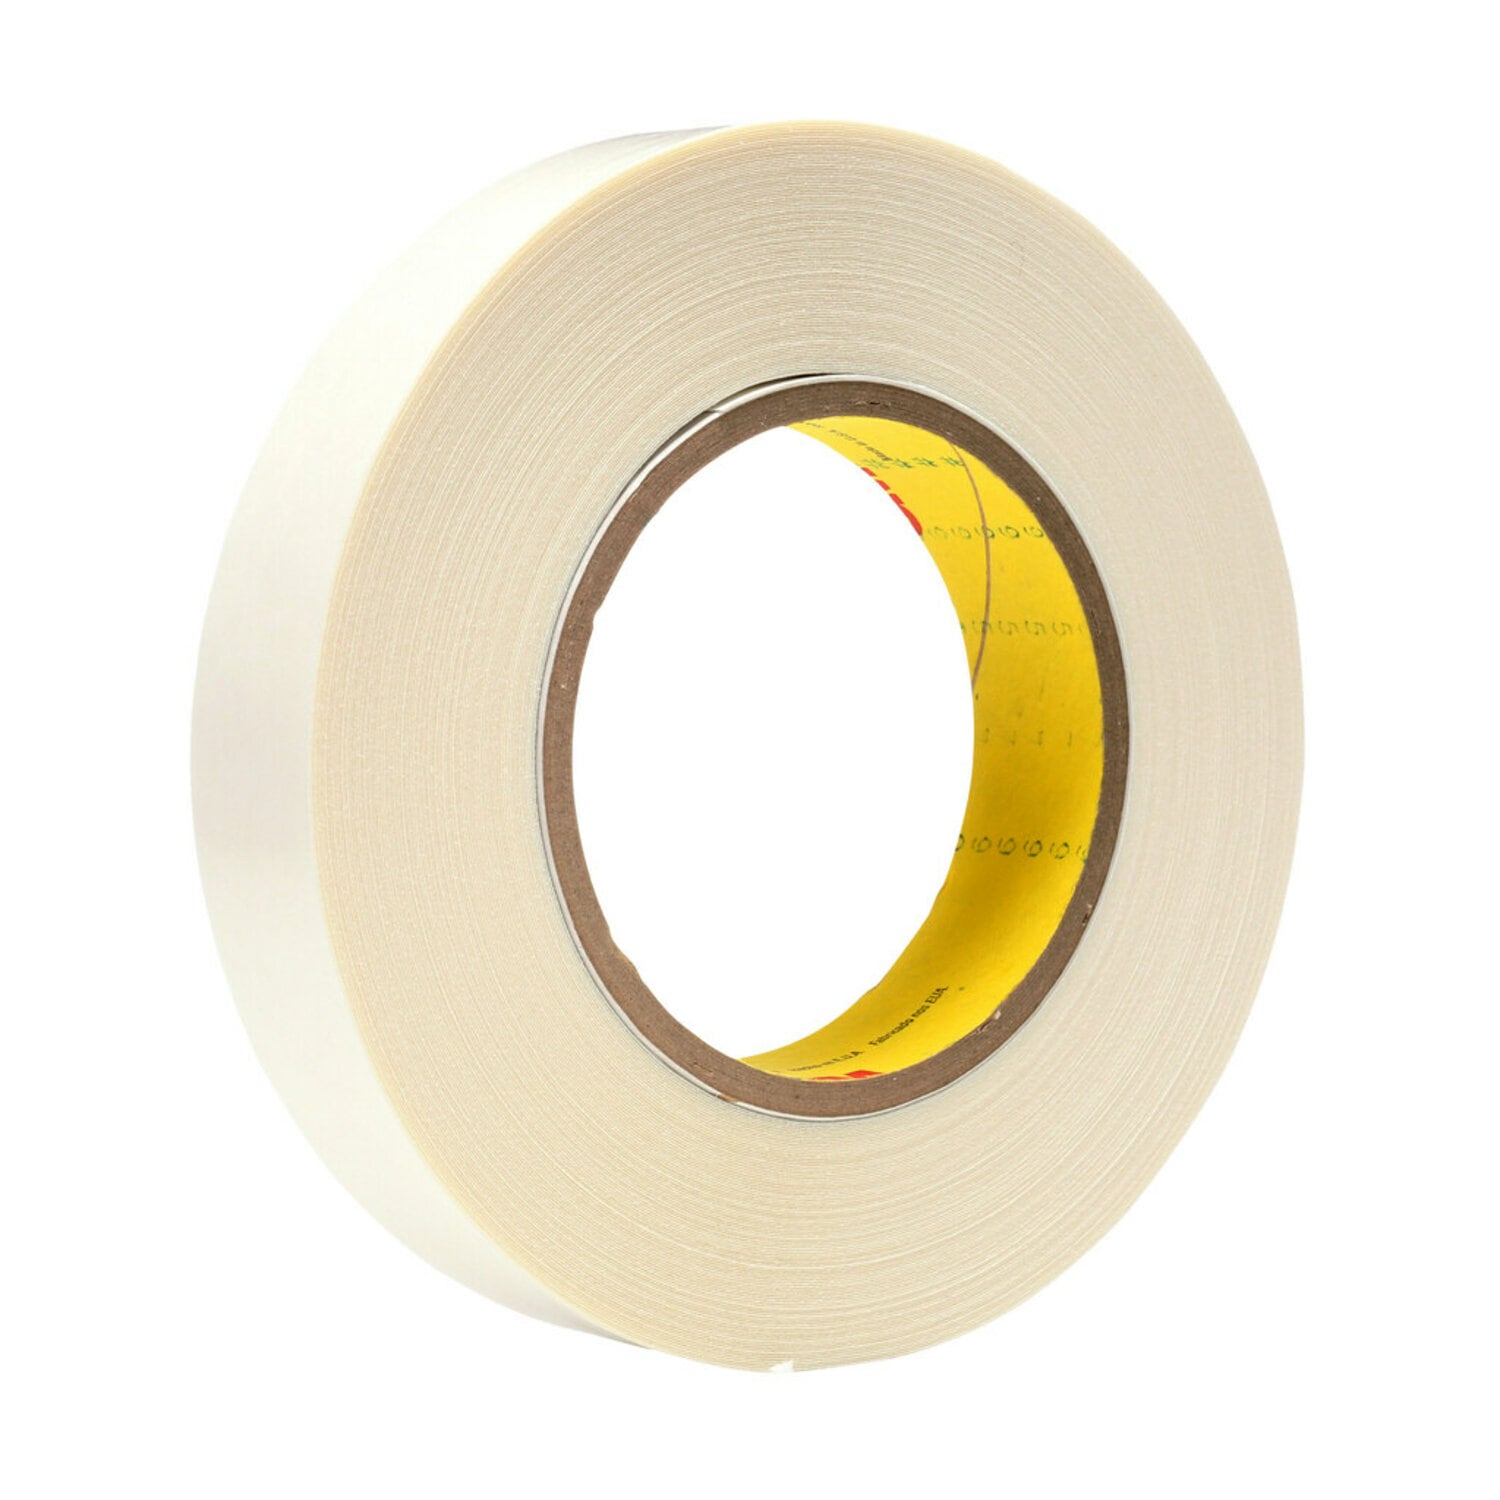 7100000183 - 3M Double Coated Tape 9579, White, 9 mil, Roll, Config